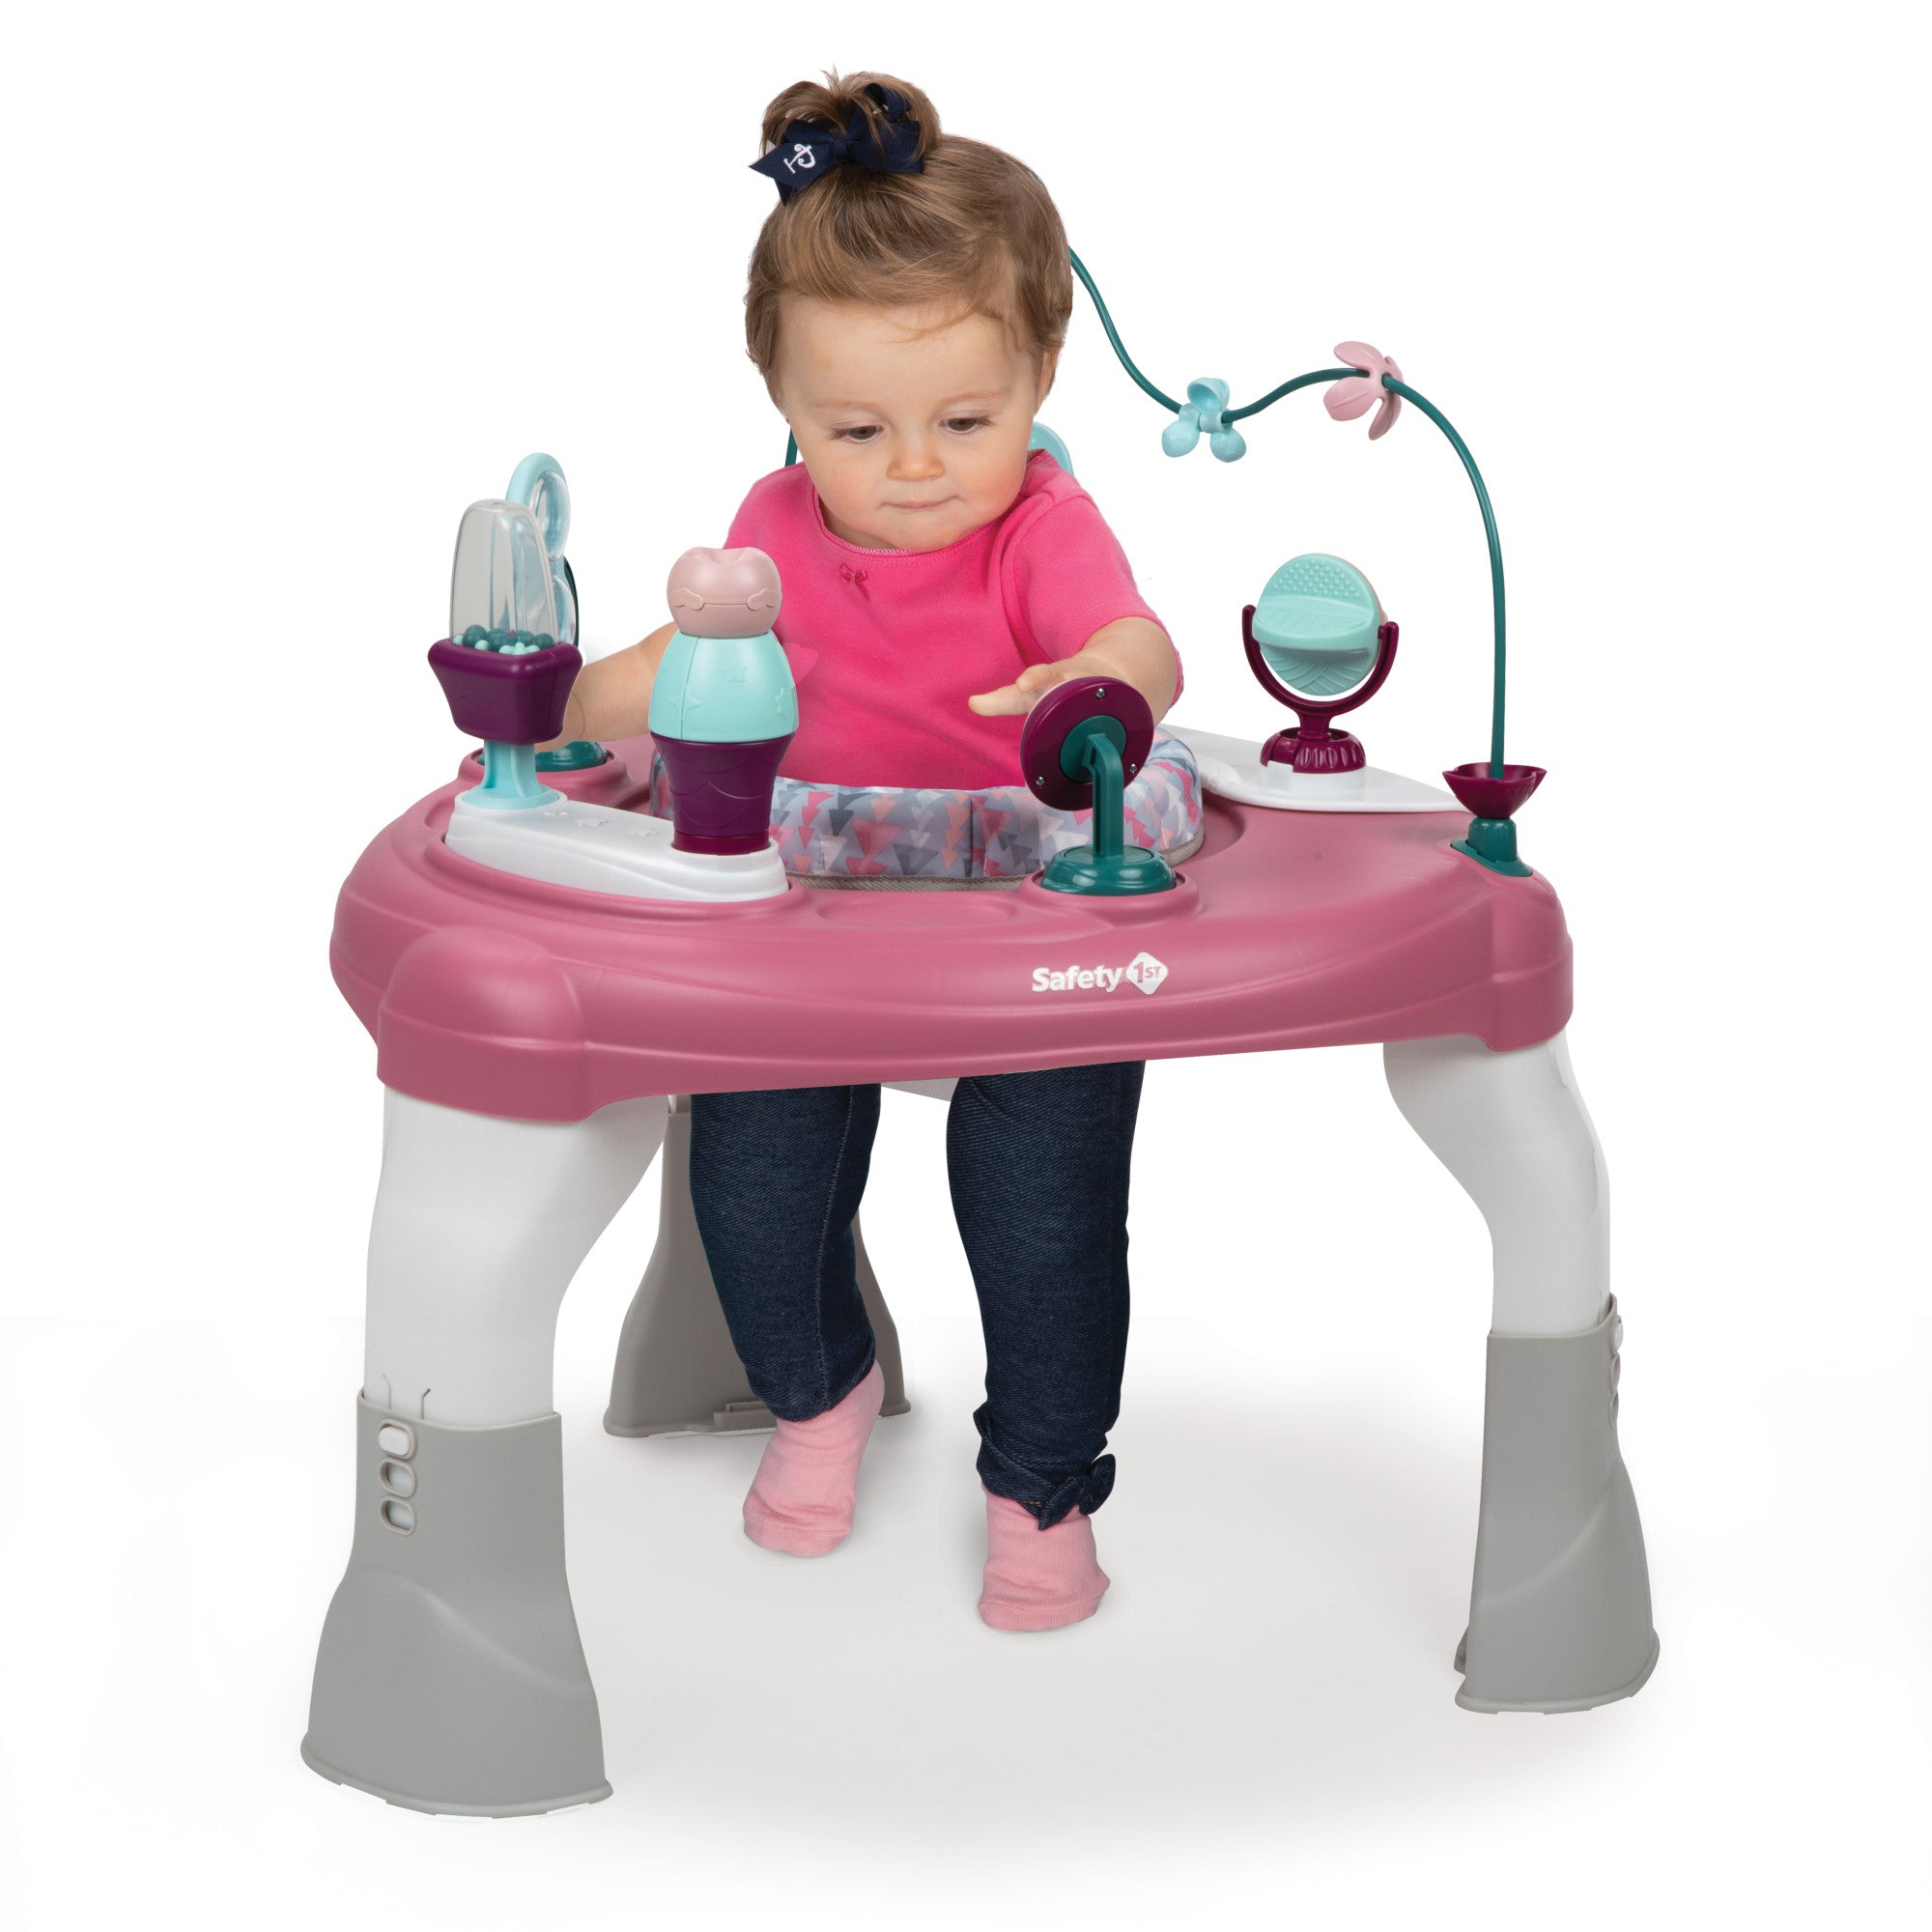 Safety 1st Grow and Go 4-in-1 Stationary Activity Center, Oslo Pink